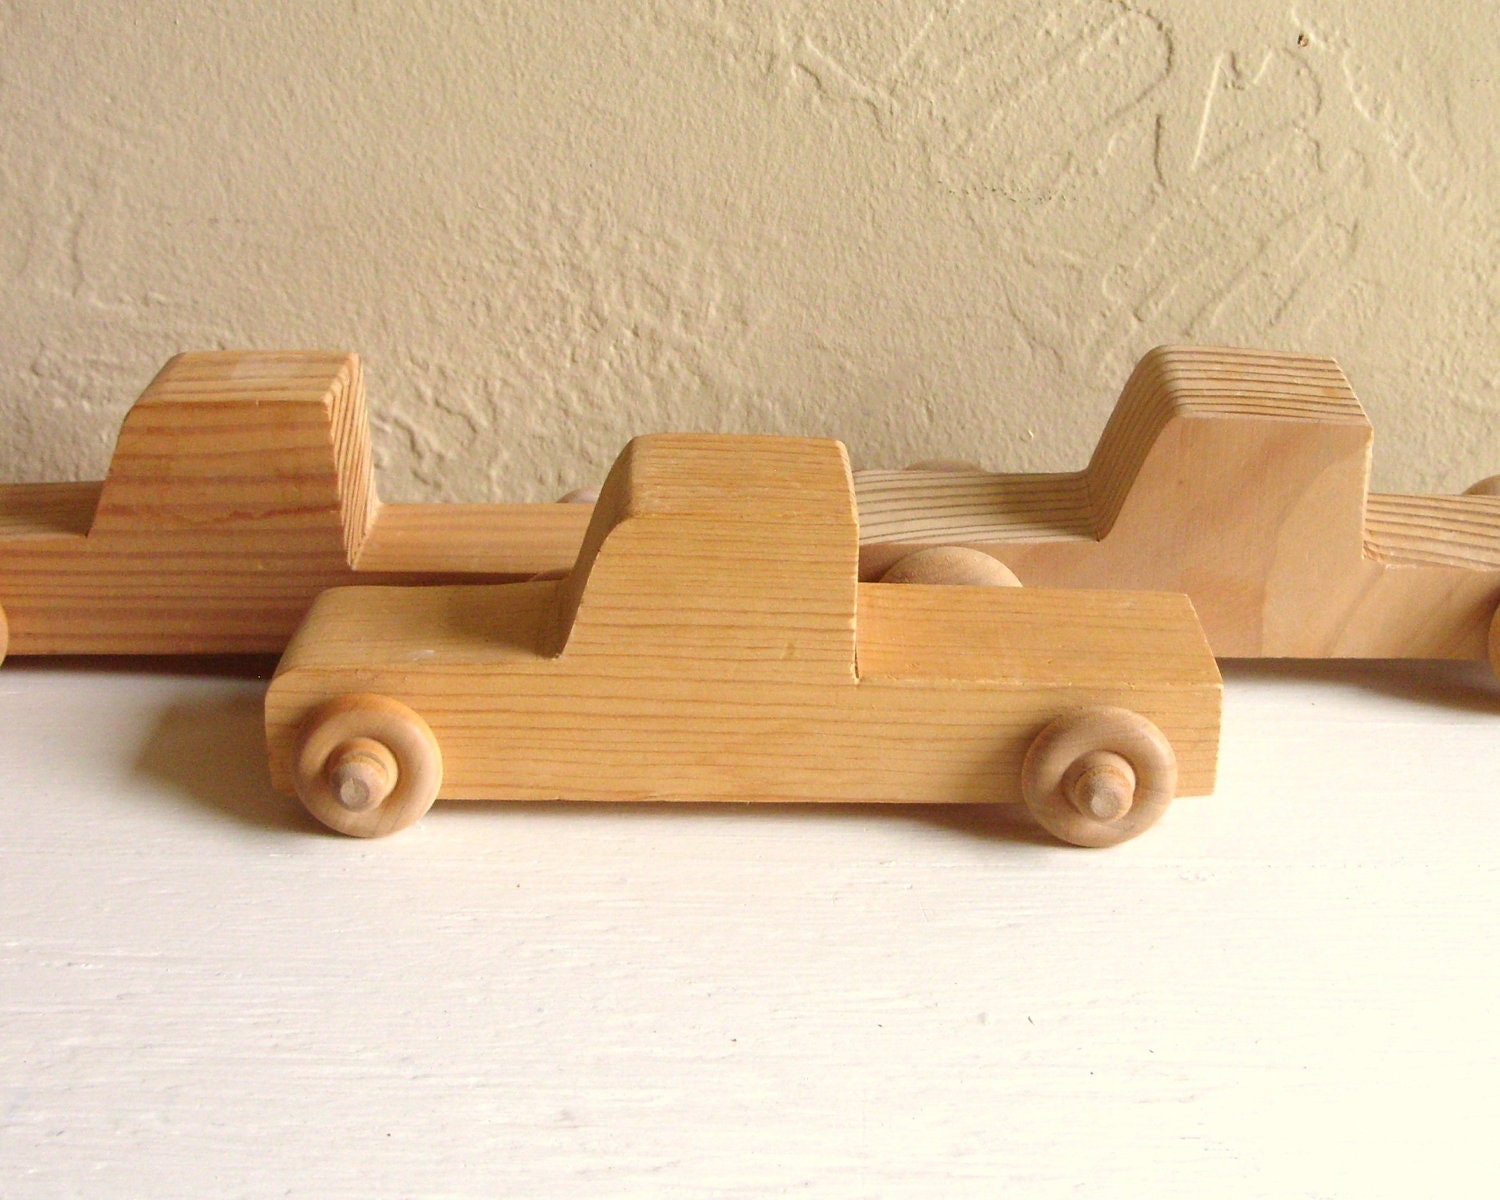 SALE Unfinished Wood Trucks Wooden Toy Pick-up Cars Ready